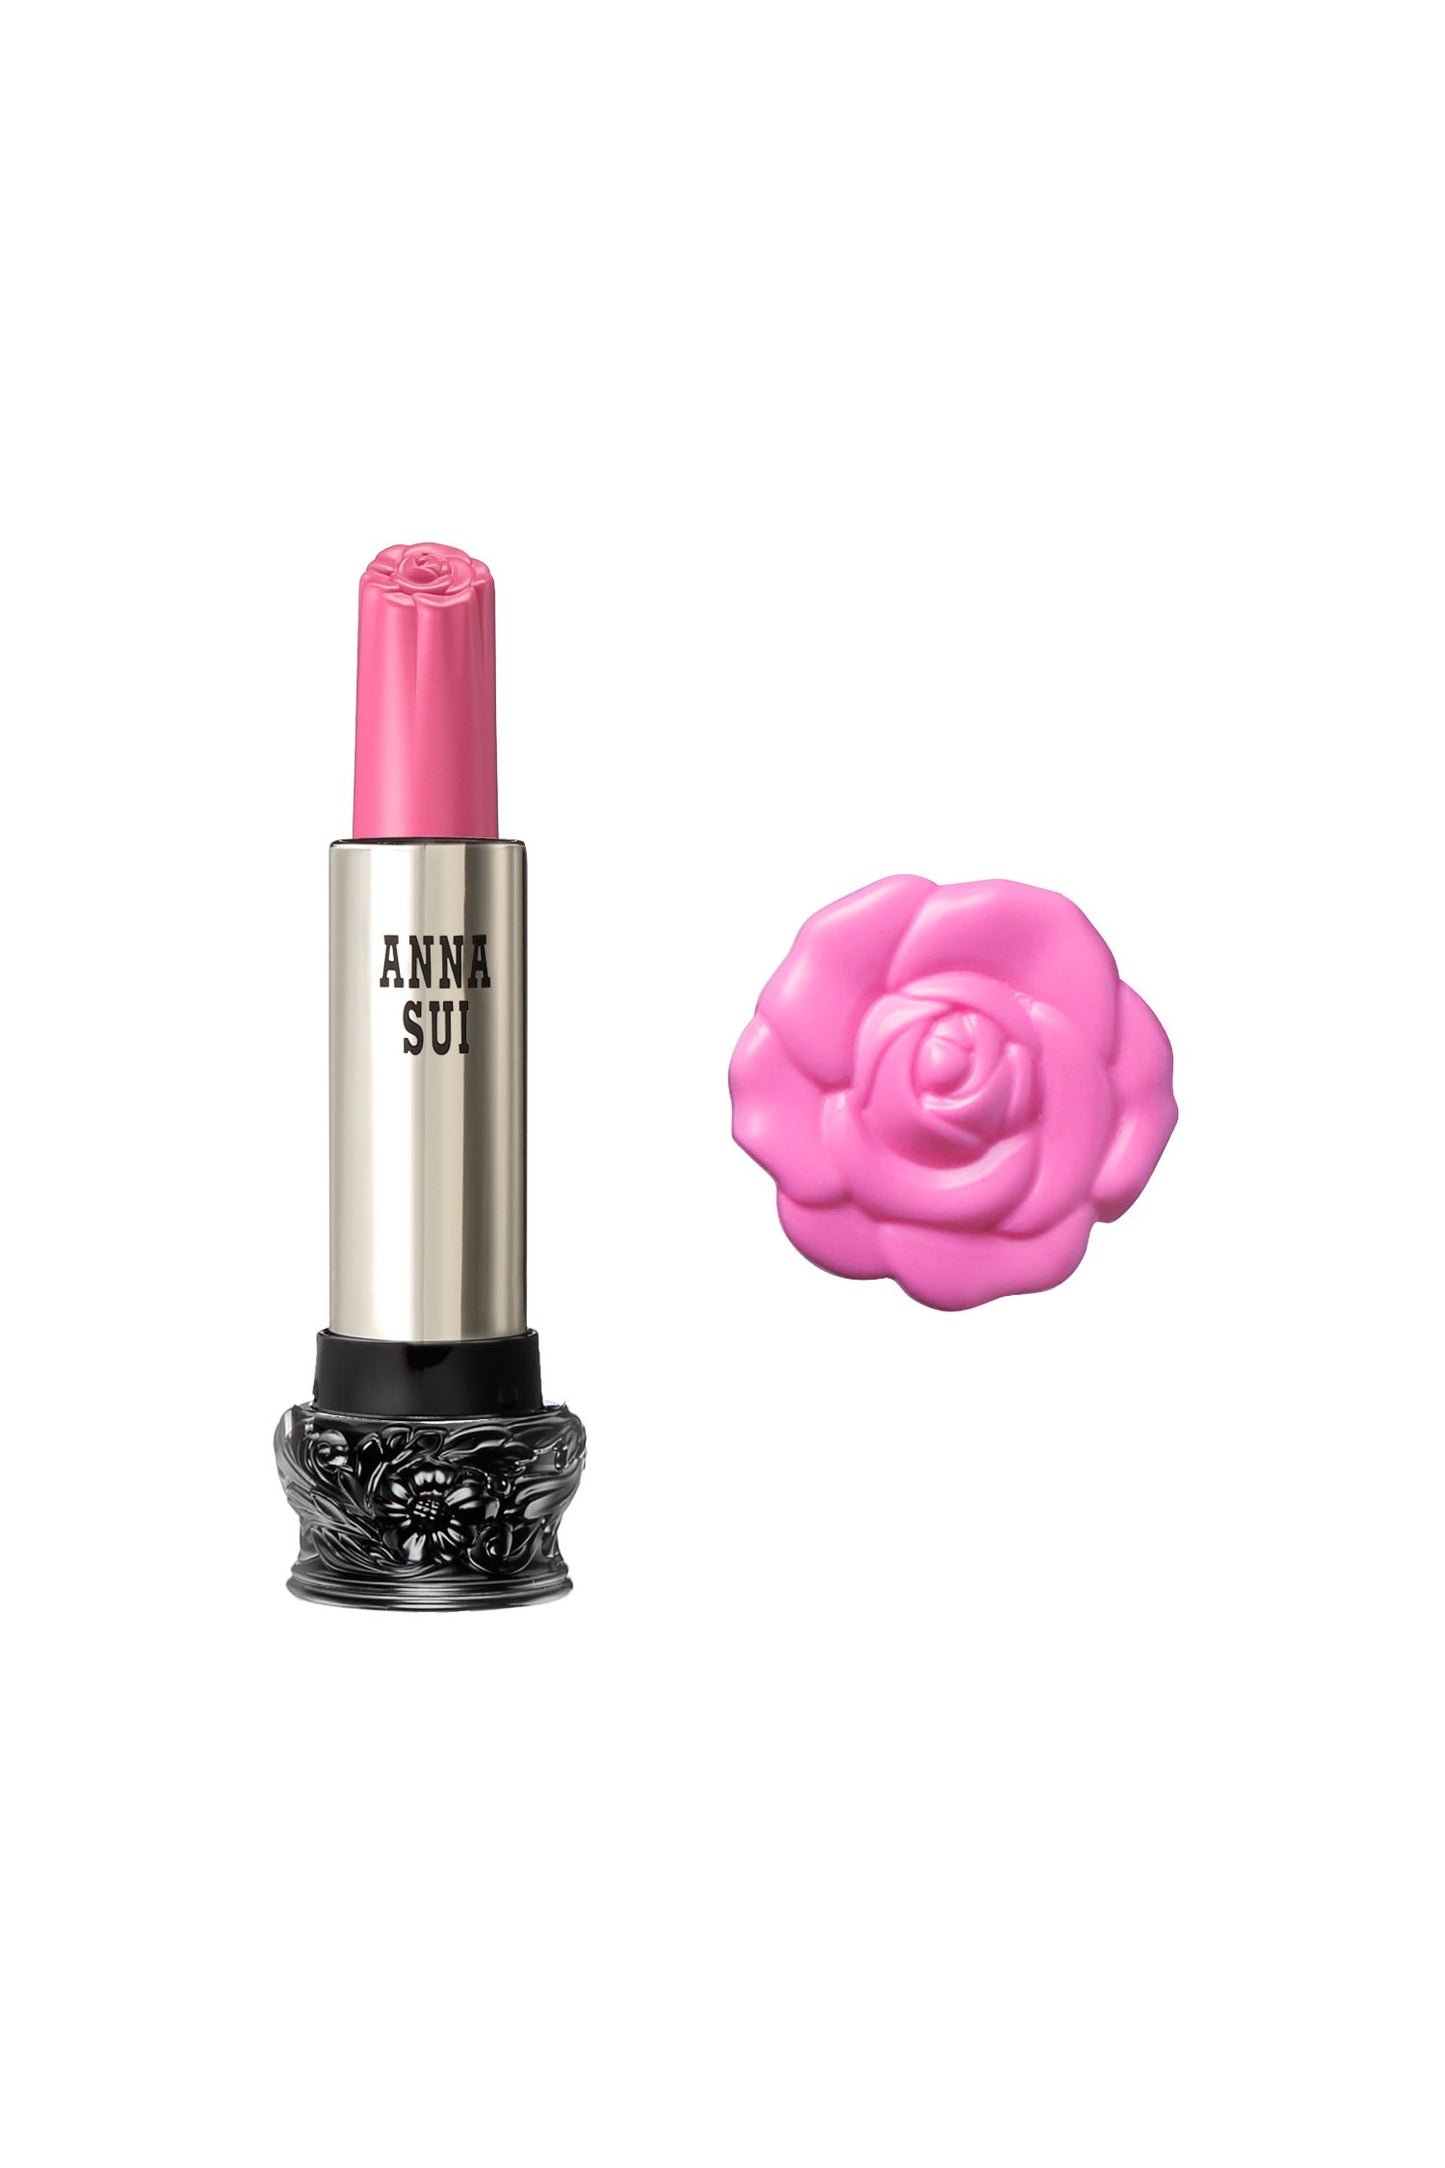 303 - Pink Cosmos Lipstick F: Fairy Flower, in a cylindrical container, large black base, engraved floral design, metallic body